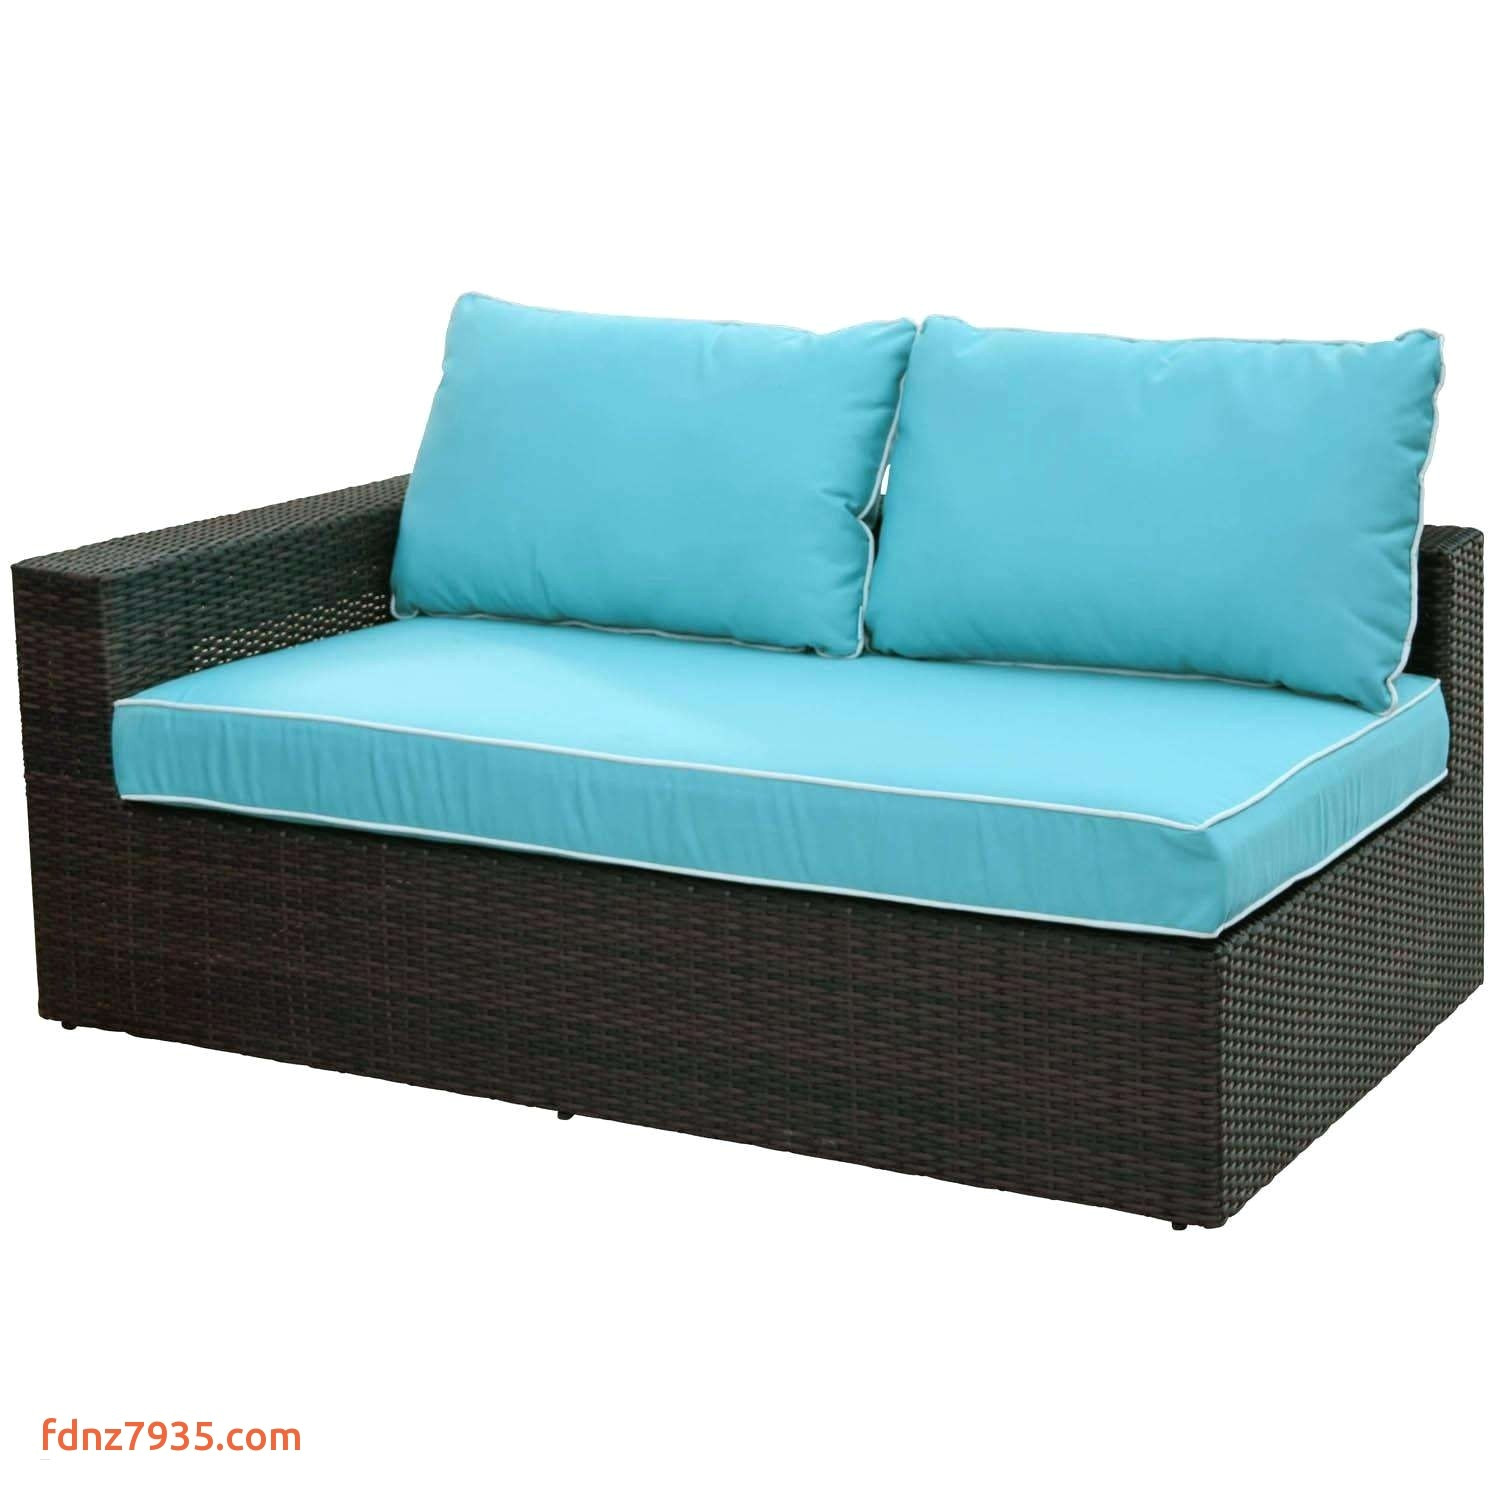 outdoor dining set fresh wicker outdoor sofa 0d patio chairs sale replacement cushions scheme